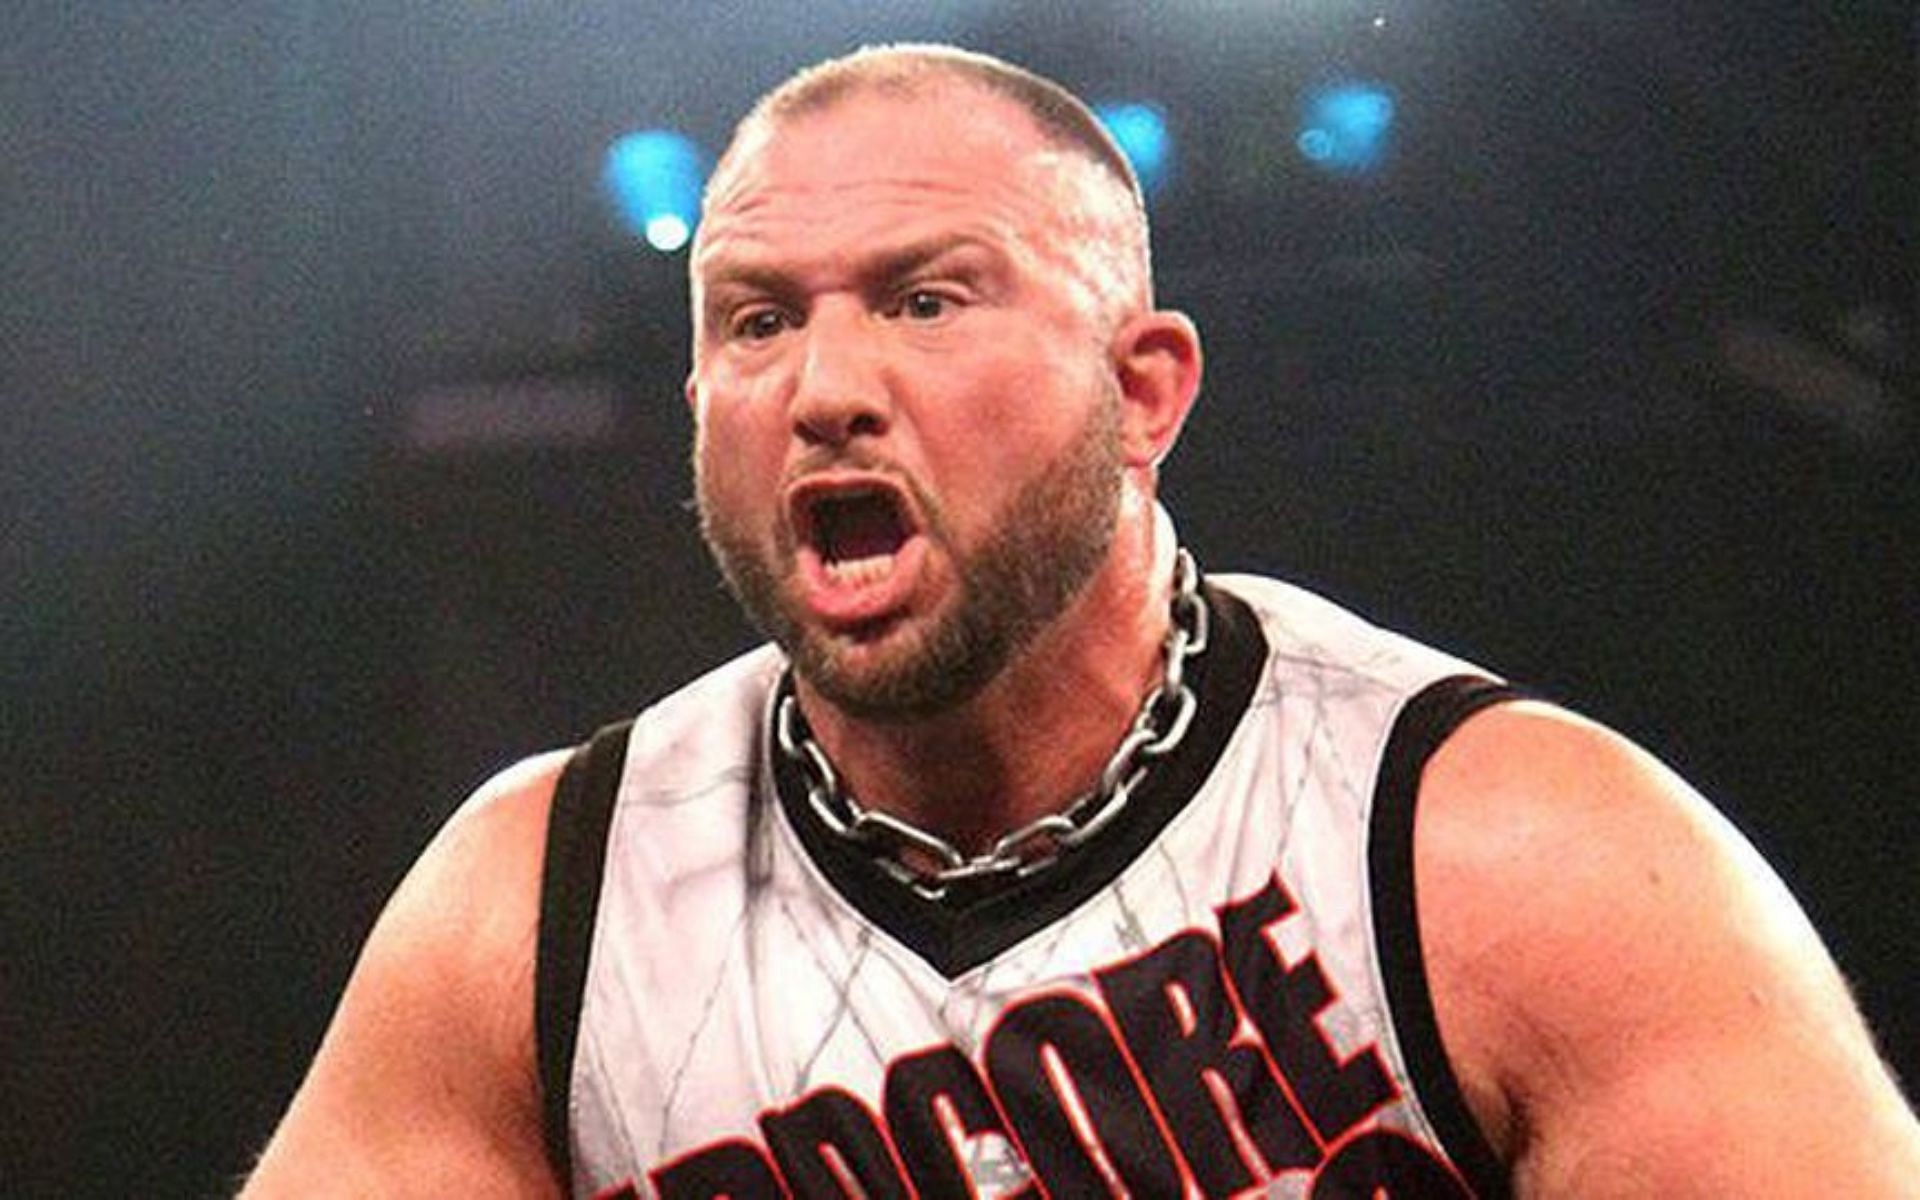 Former WWE Tag Team Champion, Bully Ray (Bubba Ray Dudley).